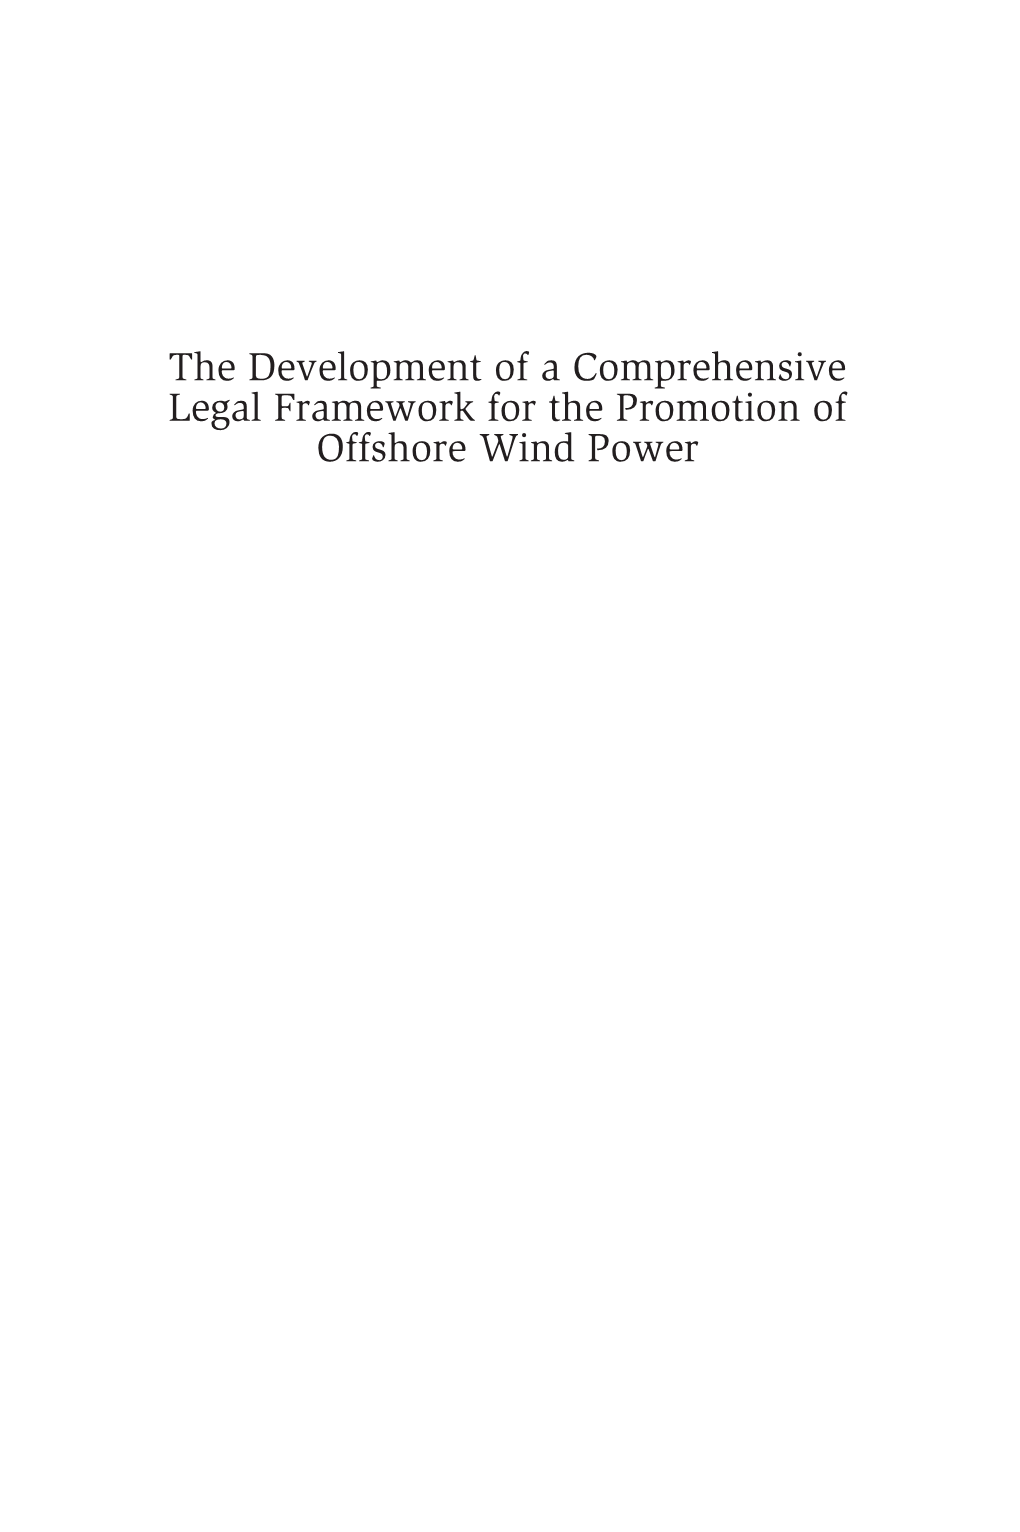 The Development of a Comprehensive Legal Framework for the Promotion of Offshore Wind Power Energy and Environmental Law and Policy Series